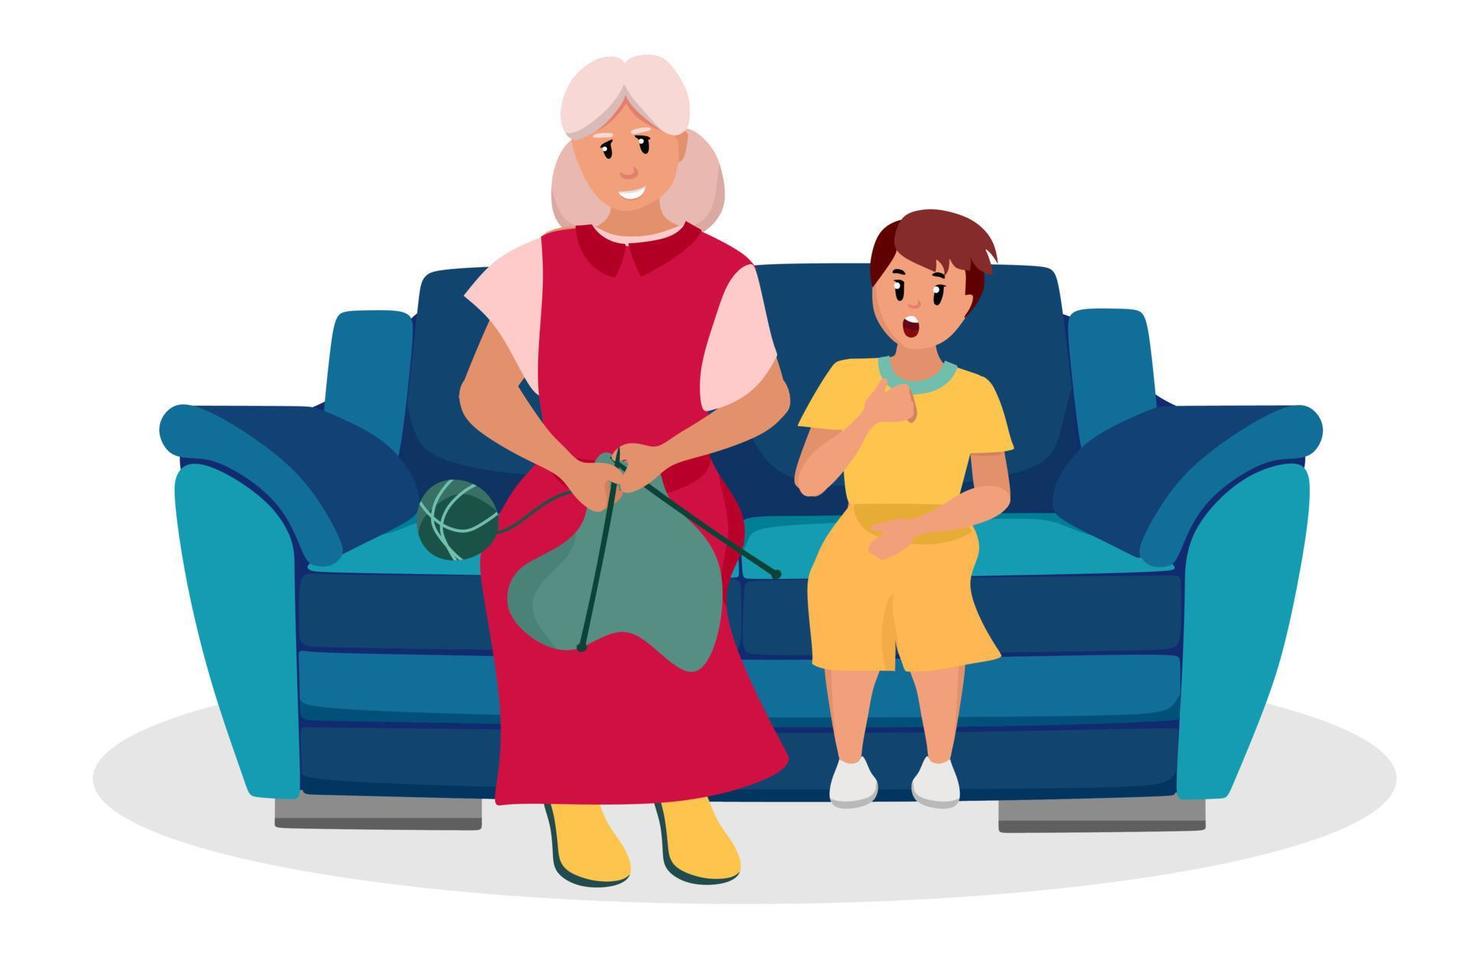 The older woman is a grandmother with her grandson sitting on the couch. Elderly people are cartoon characters. Old age. Vector illustration of a flat style, isolated on a white background